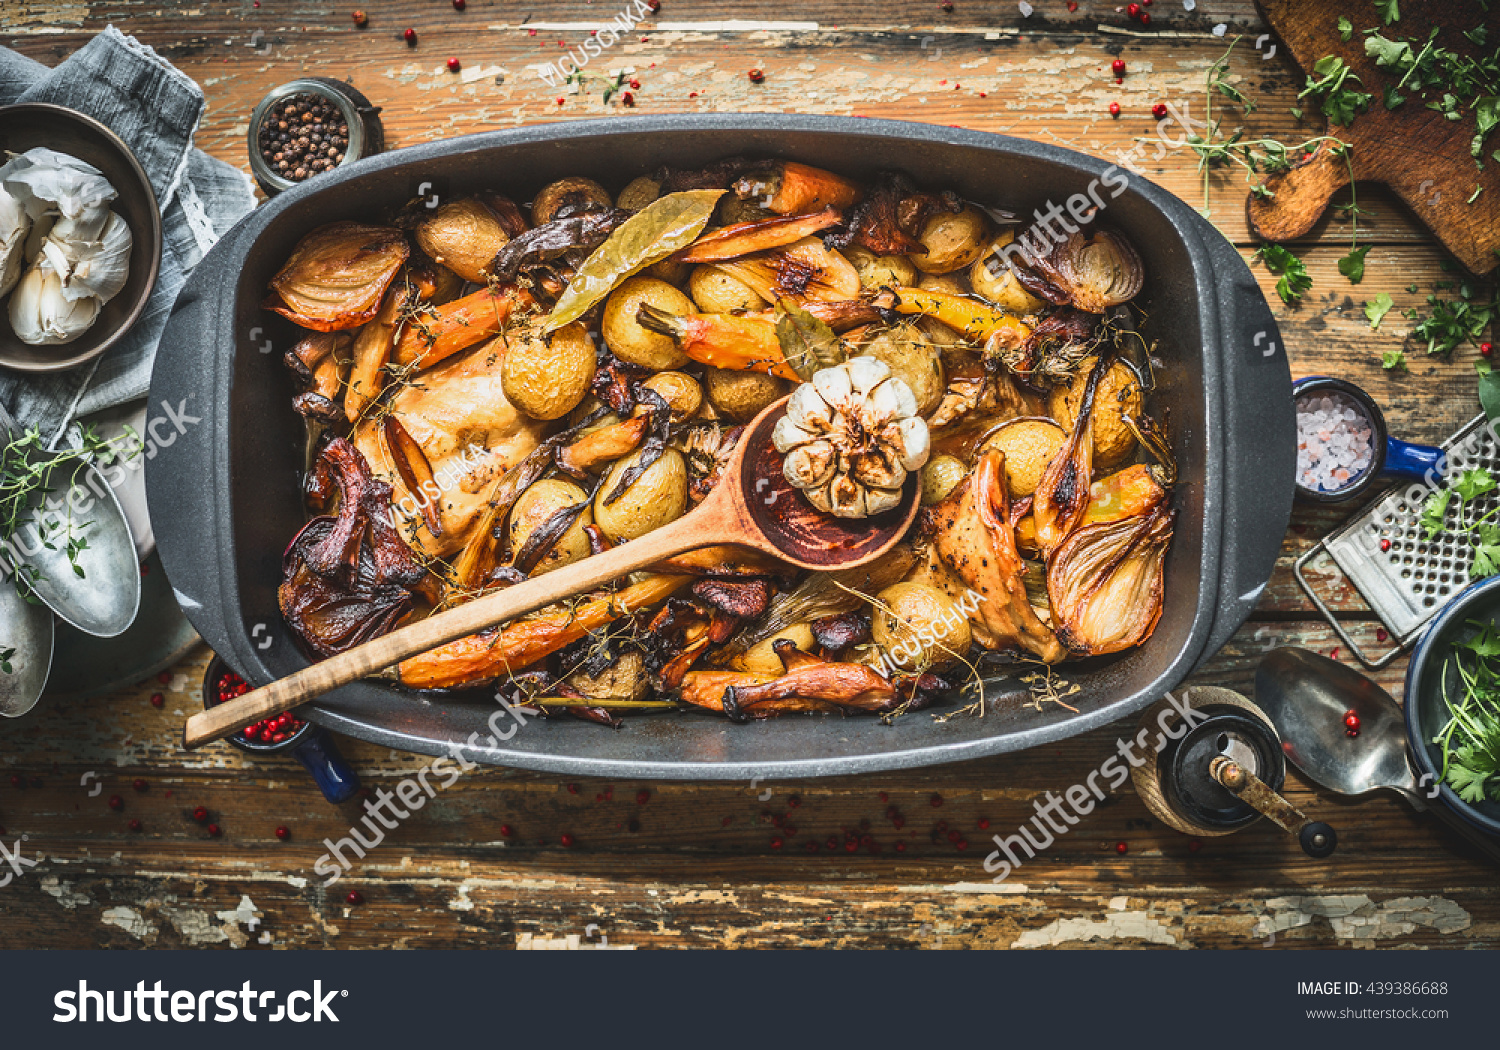  Stew with roasted vegetables, forest mushrooms and wild hunting fowl in cooking pot with wooden spoon. Rabbit ragout on rustic aged background with spoons,plates and fresh seasoning, top view #439386688